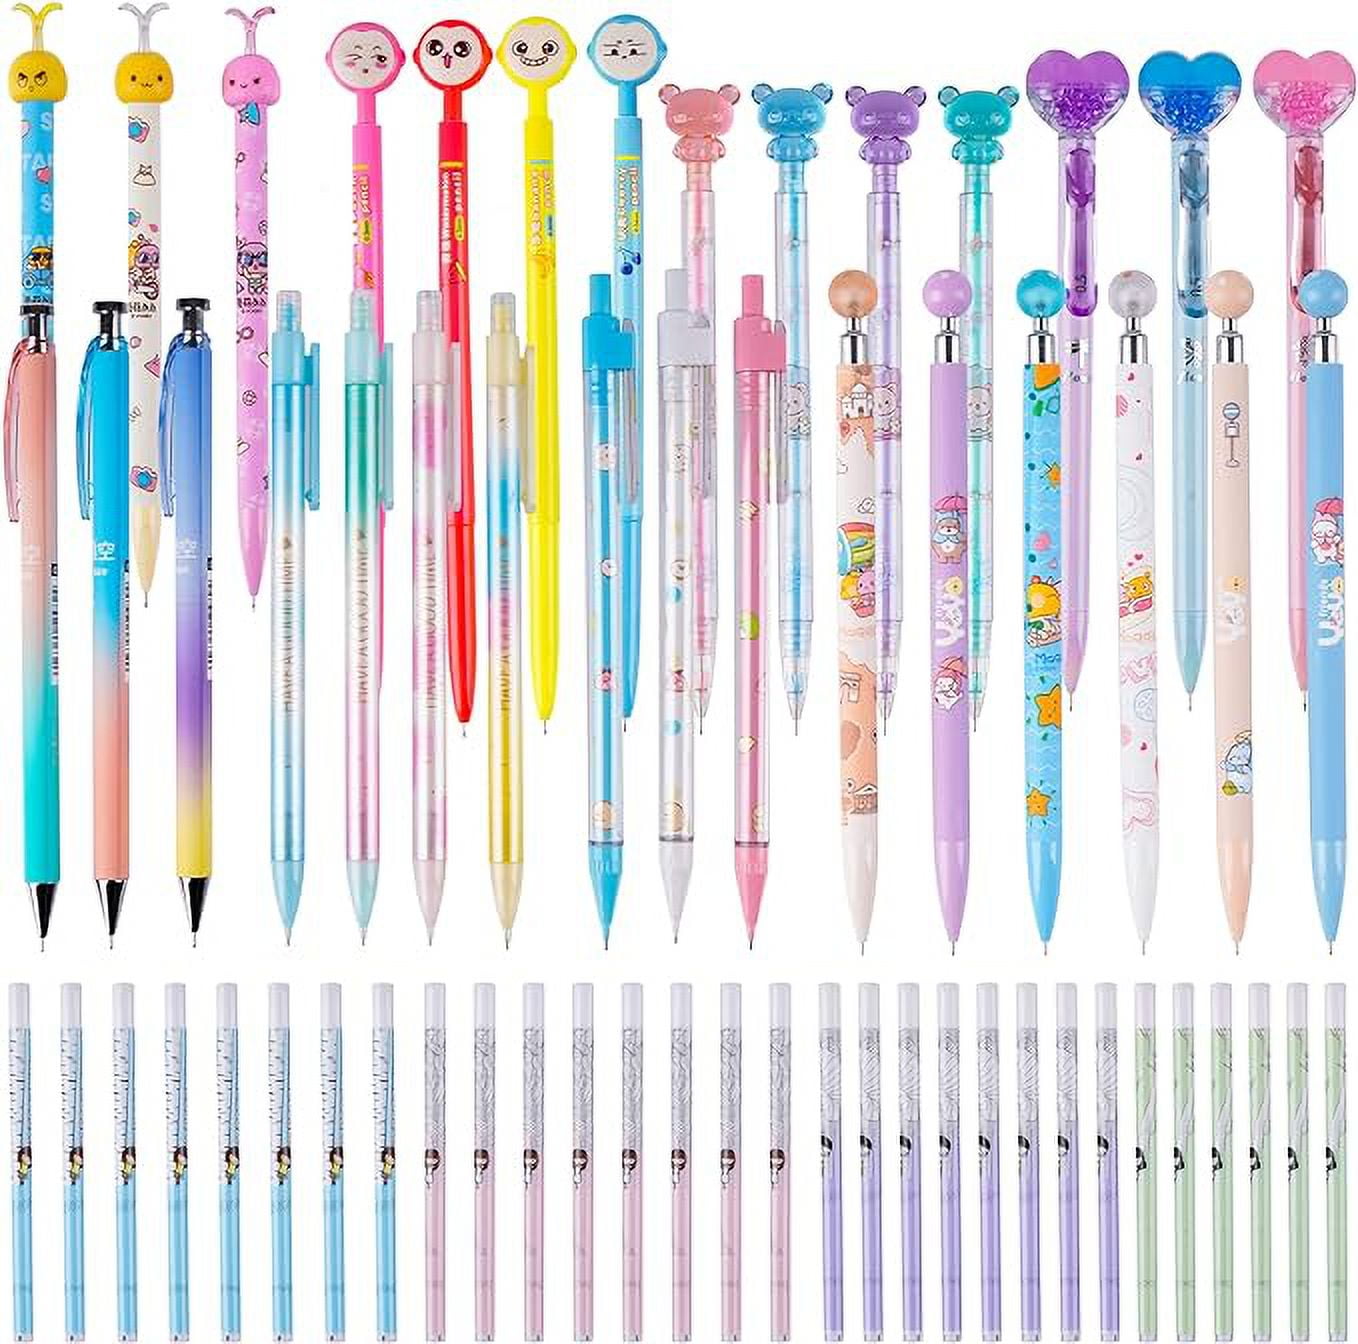 3pcs 2.0 mm Mechanical Pencil with 18pcs Lead Refills, Cute Automatic  Pencils for Draft Drawing, Writing, Crafting, Art Sketching Student Gift  Office School Supplies Korean Stationery, Random Color - Walmart.com